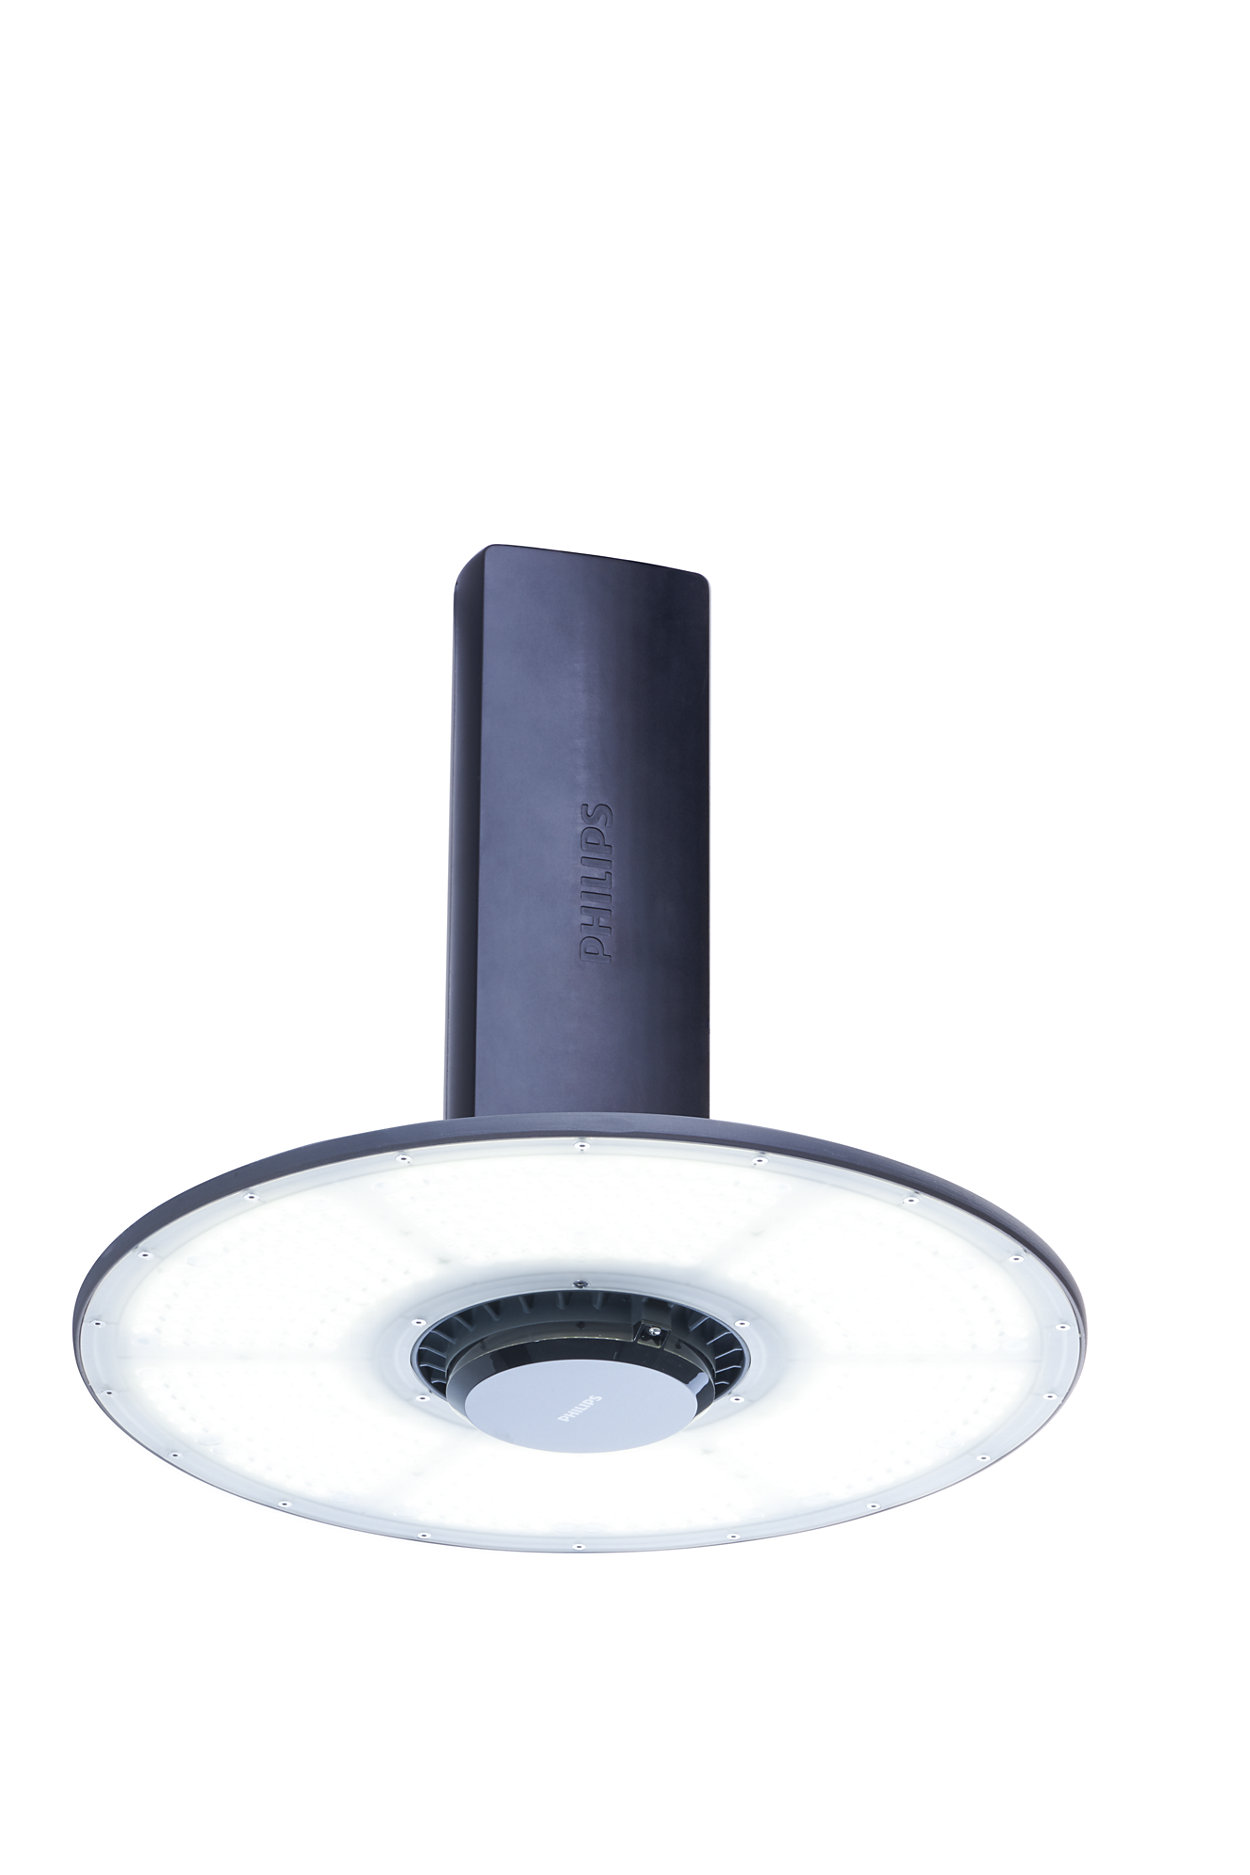 A versatile high-bay LED luminaire with high efficiency and future-proof connectivity